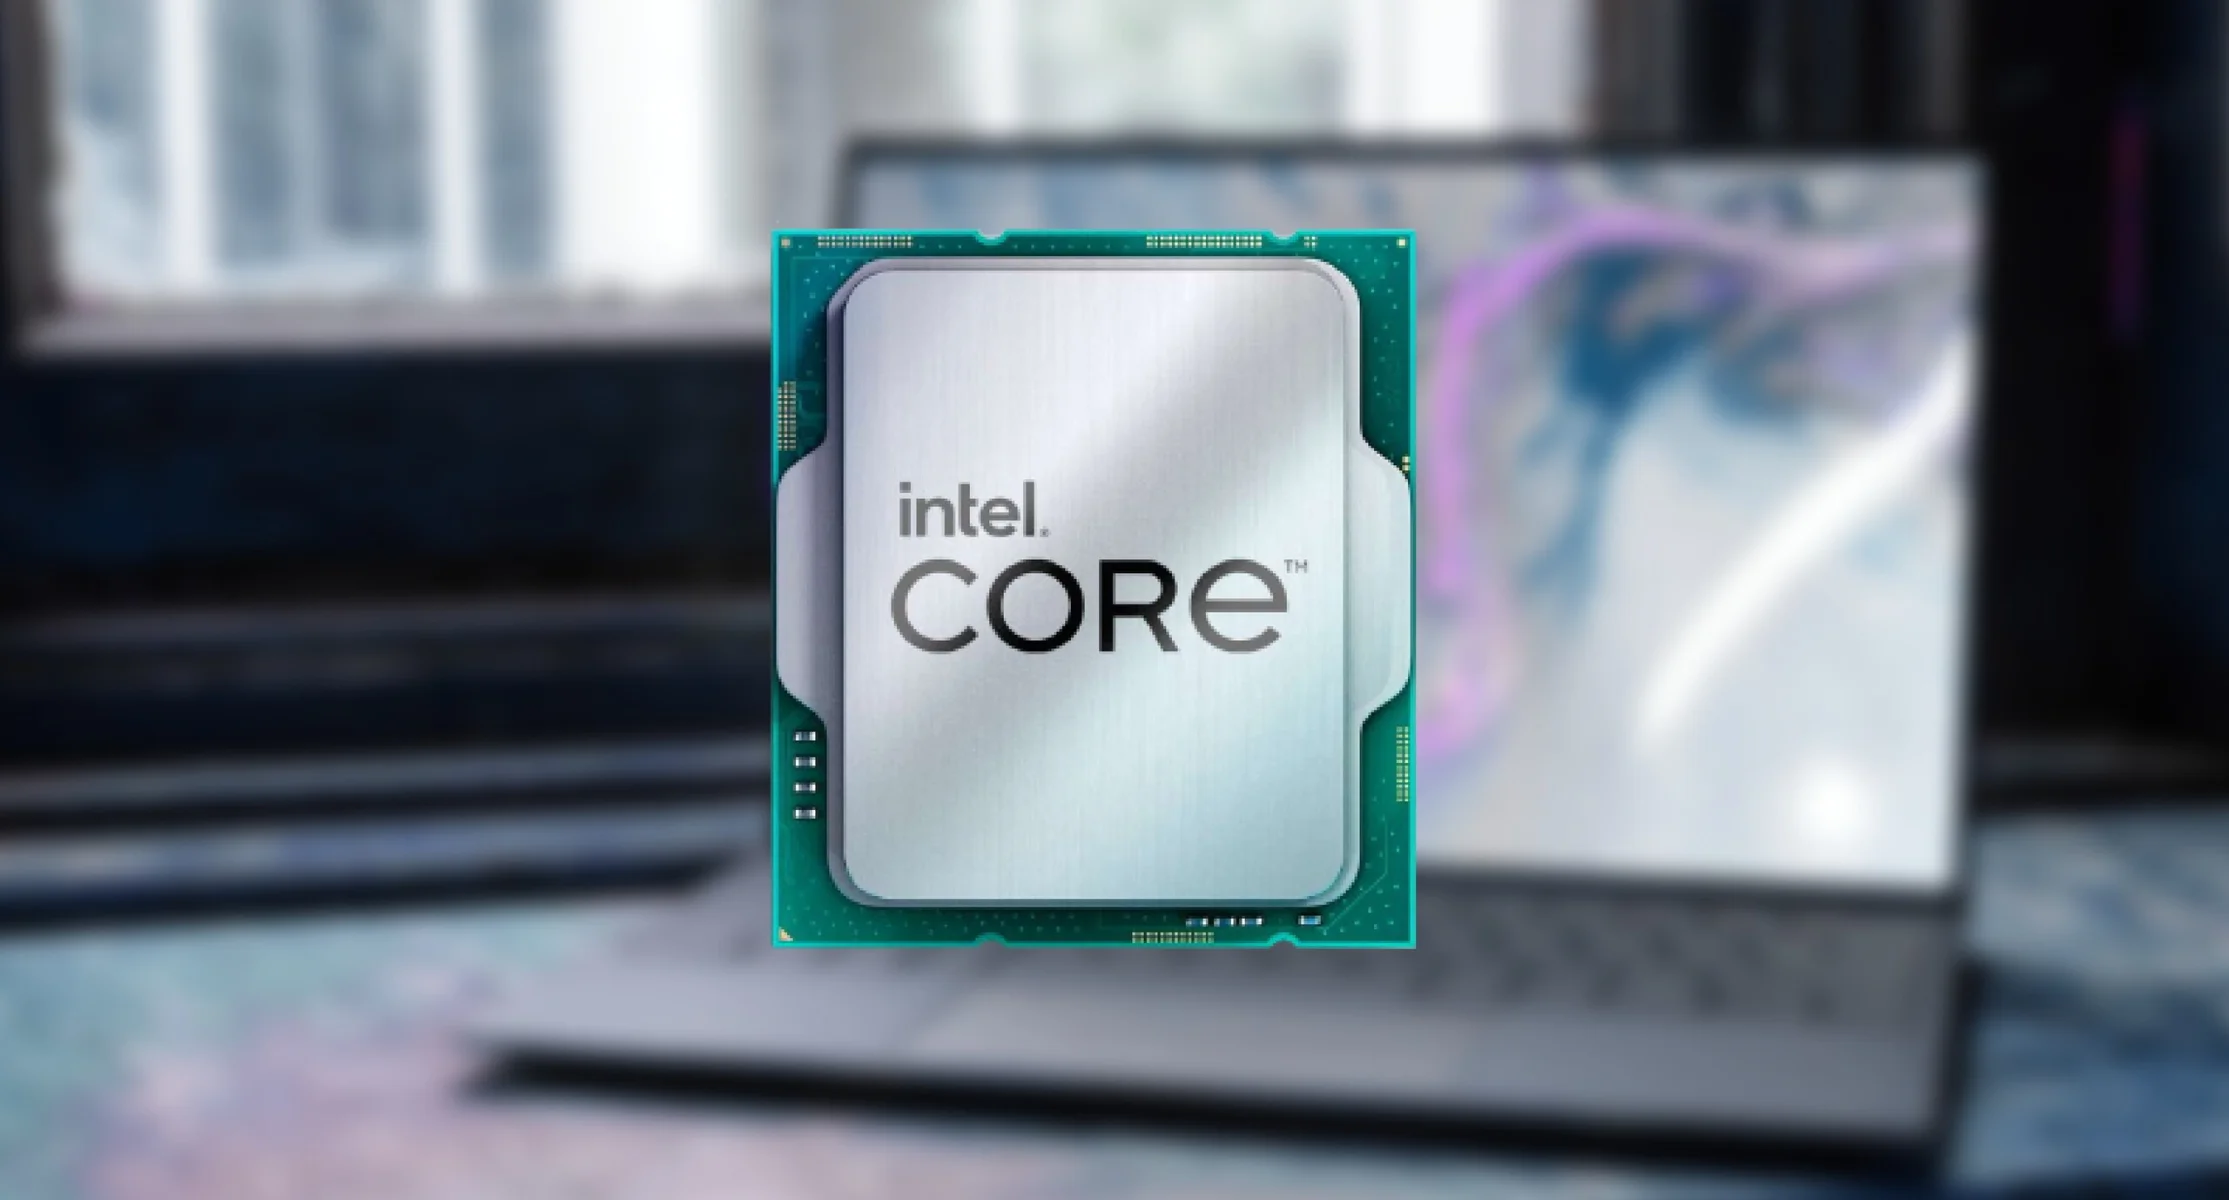 Mobile Intel Core i9-13900HK showed mediocre performance results